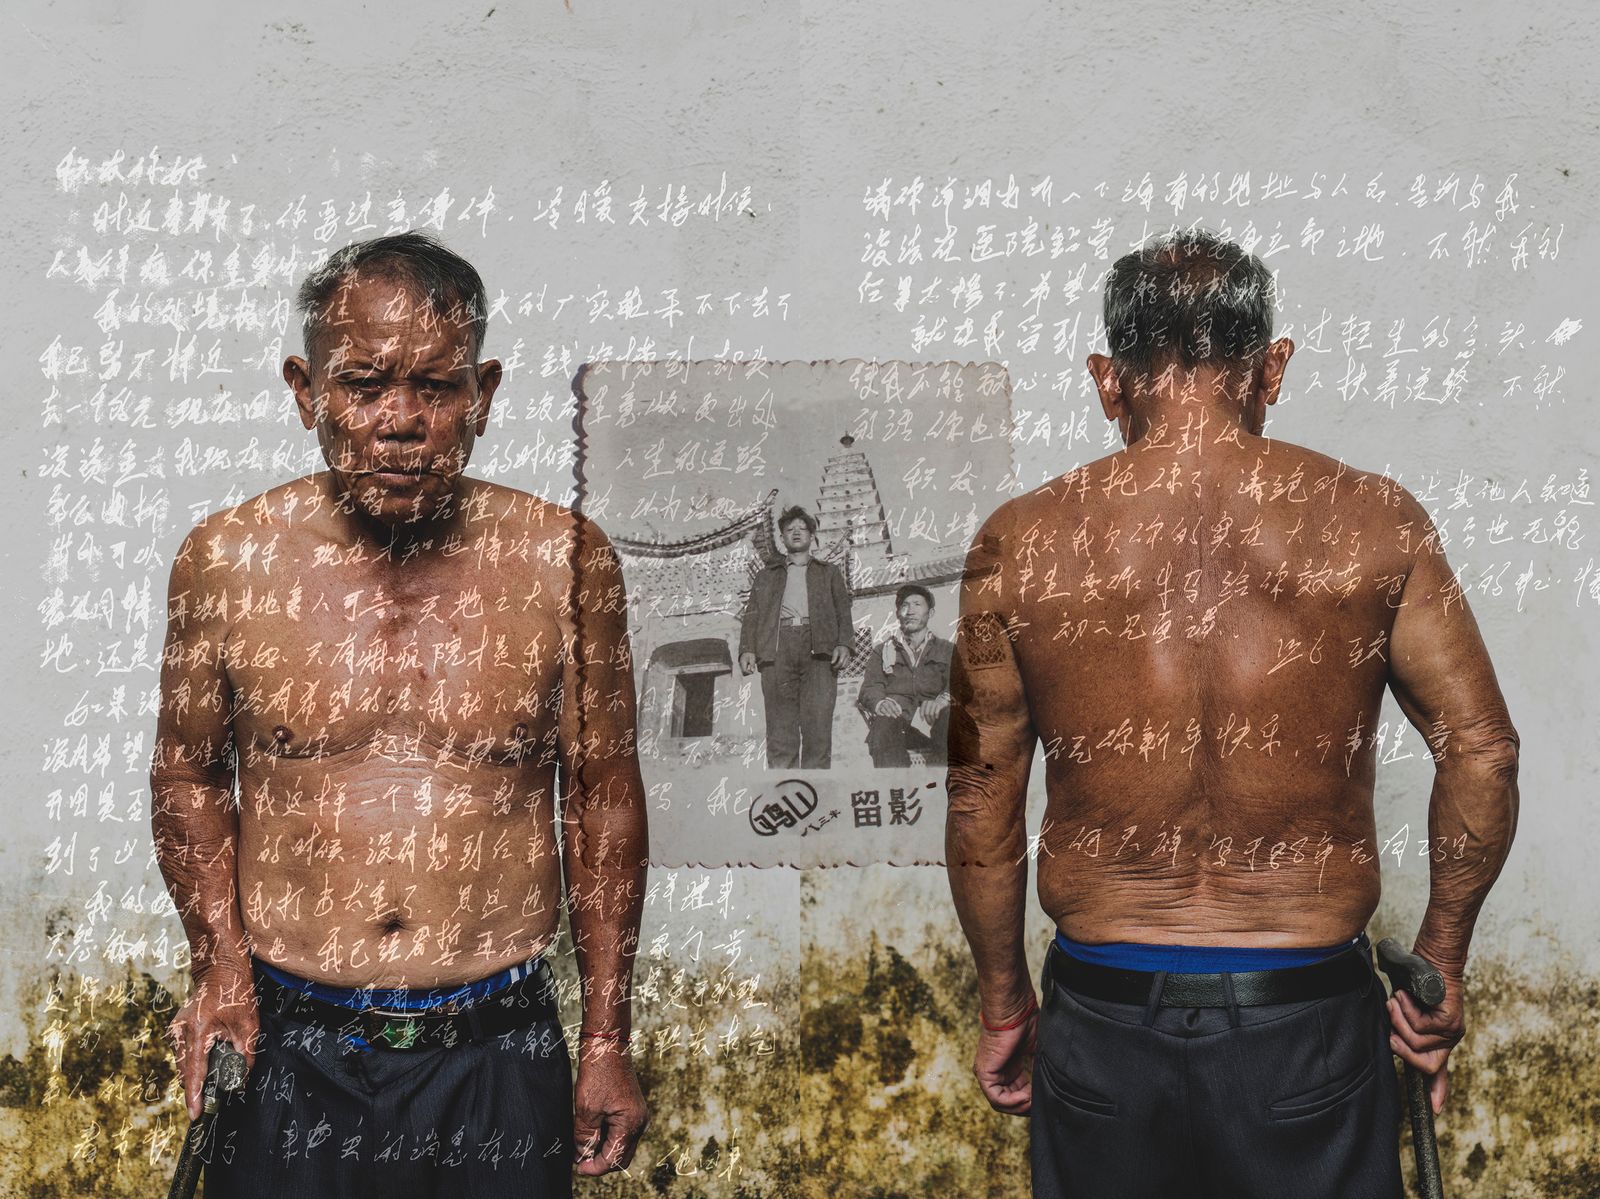 © Jin TIAN - Image from the CURSE OF THE WIND. A HISTORY OF LEPROSY IN CHIN photography project